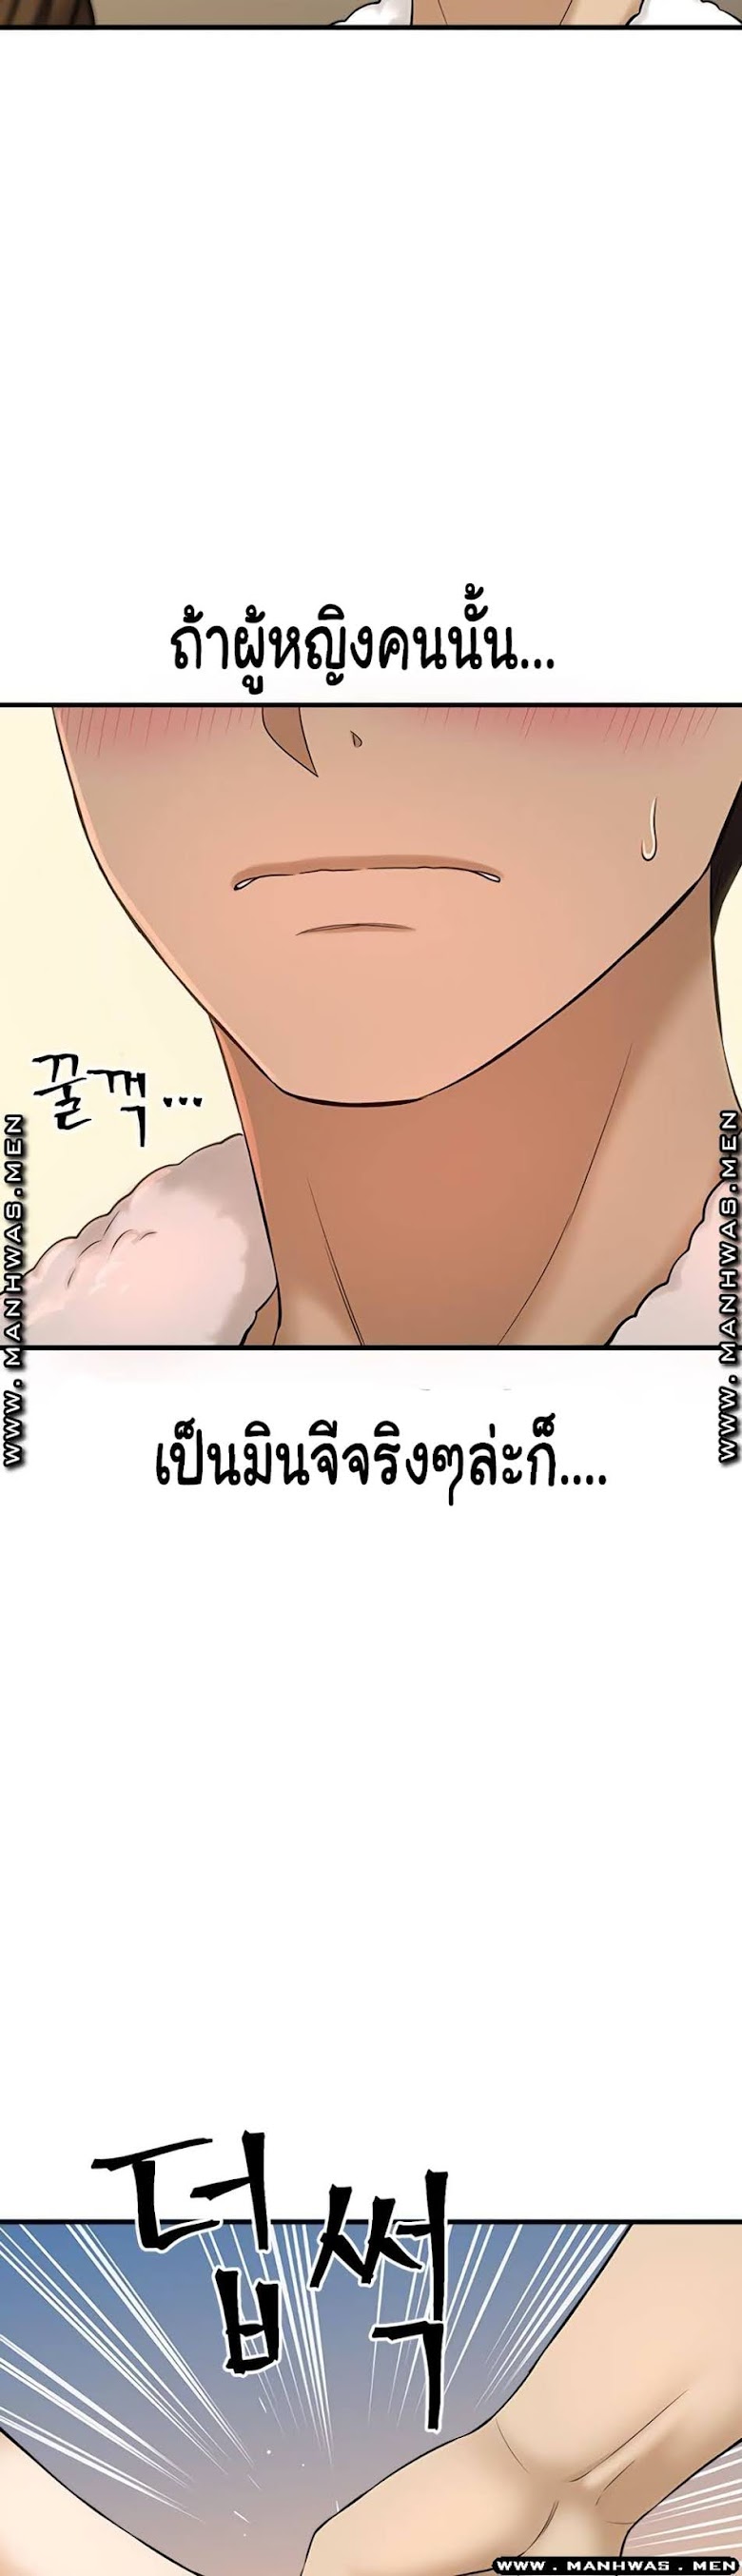 I Want to Know Her - หน้า 51